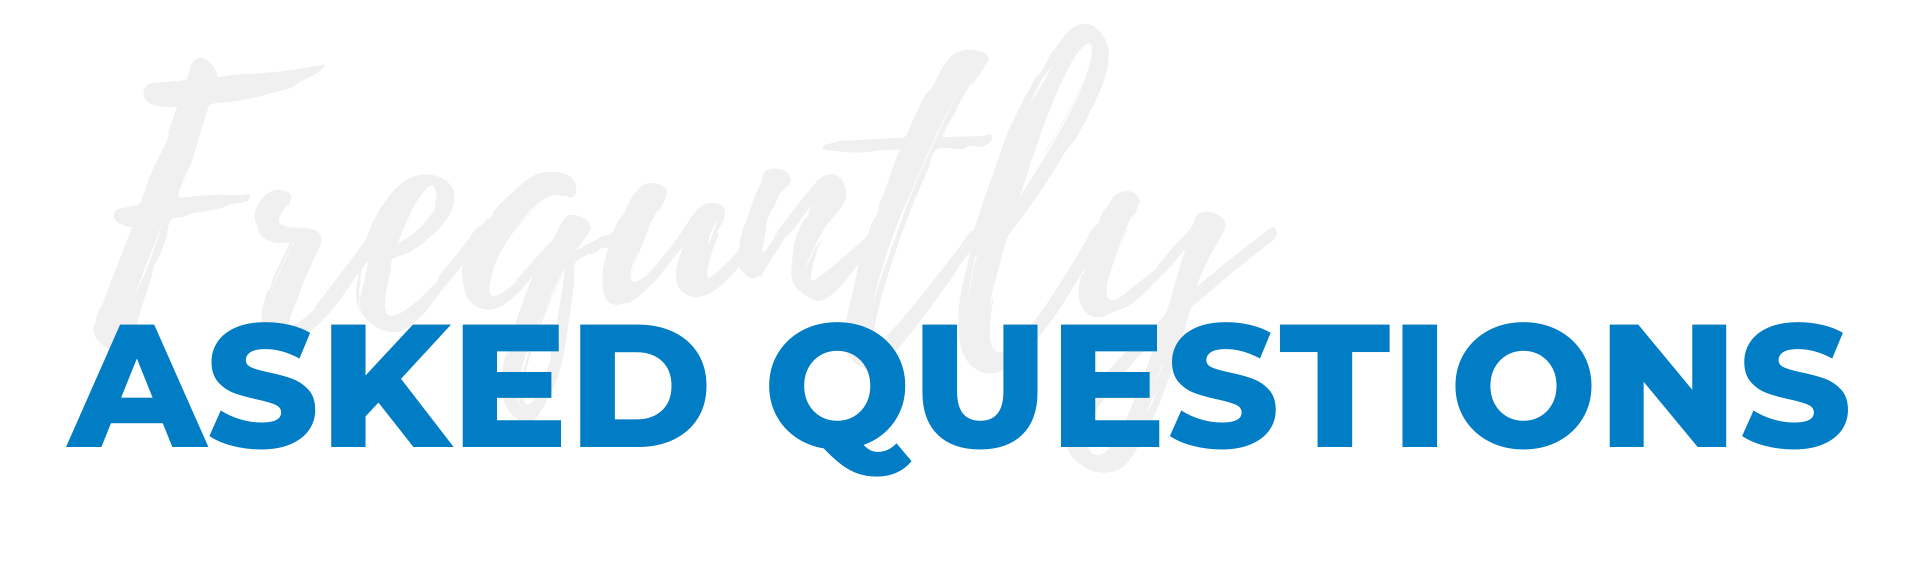 A blue and white logo text that says frequently asked questions on a white background.